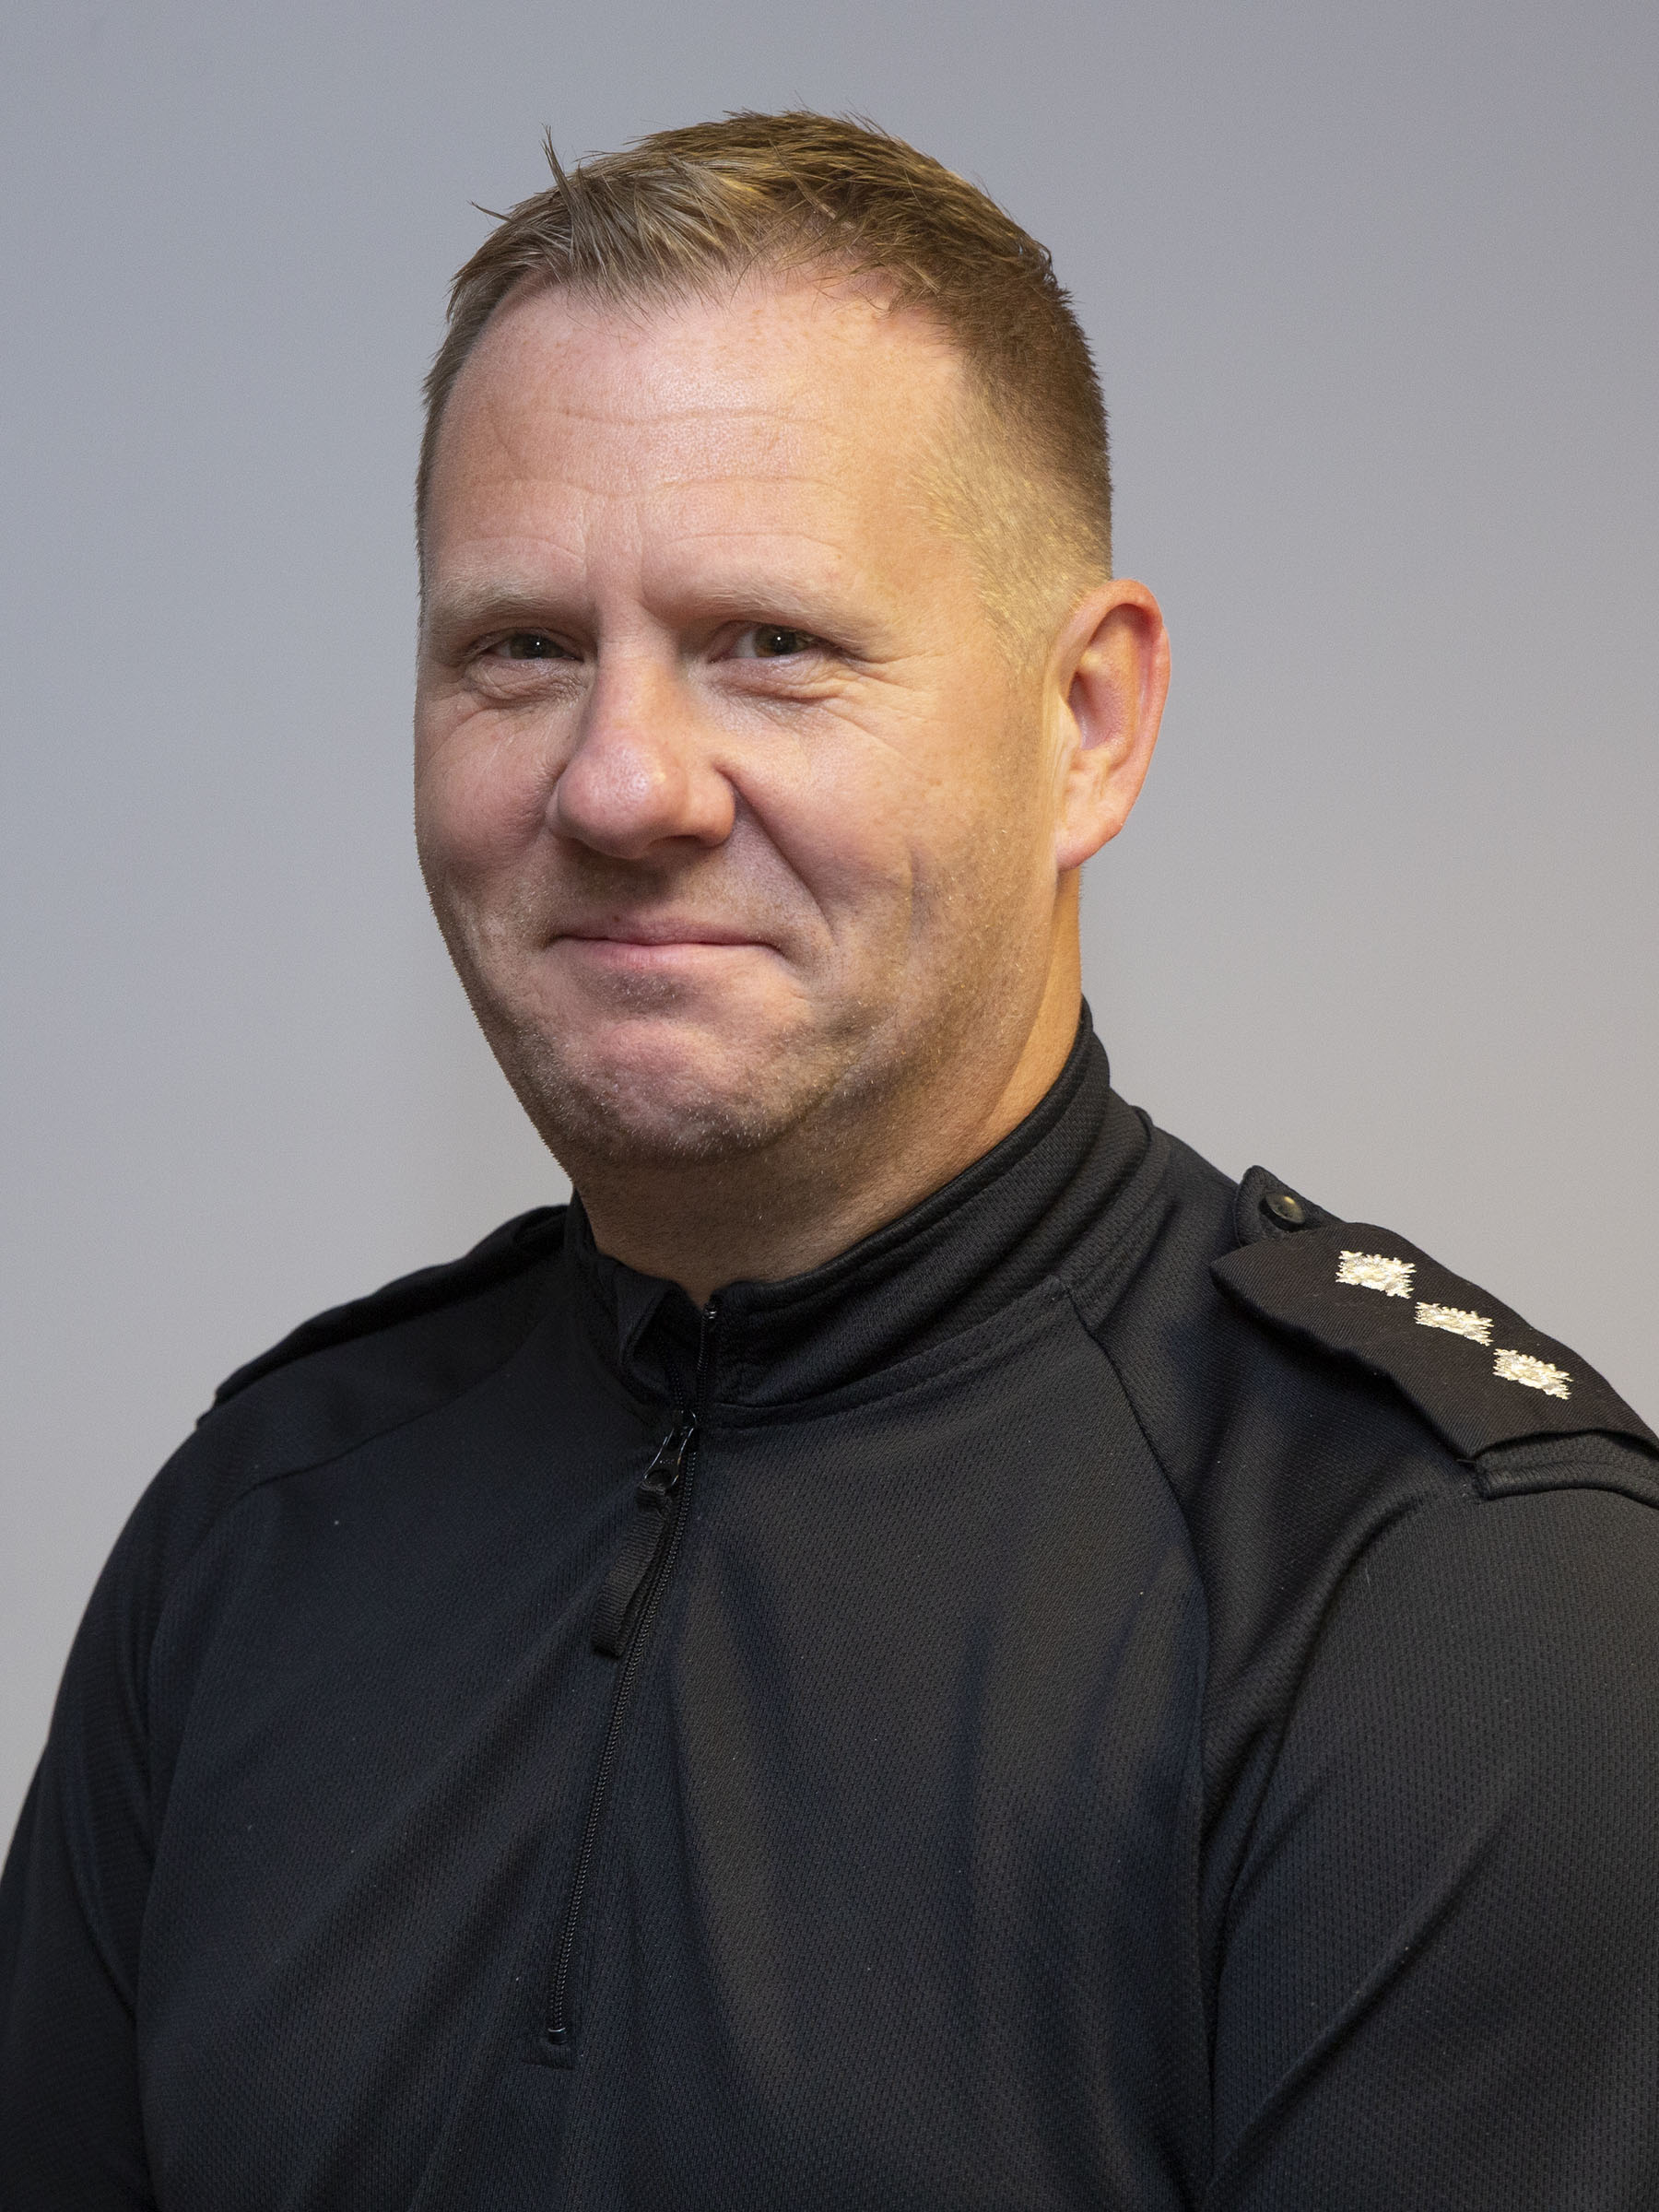 Chief Inspector Lee Broadstock, of the police's LGBT+ network, said forces needed to reflect their communities (Greater Manchester Police/PA)